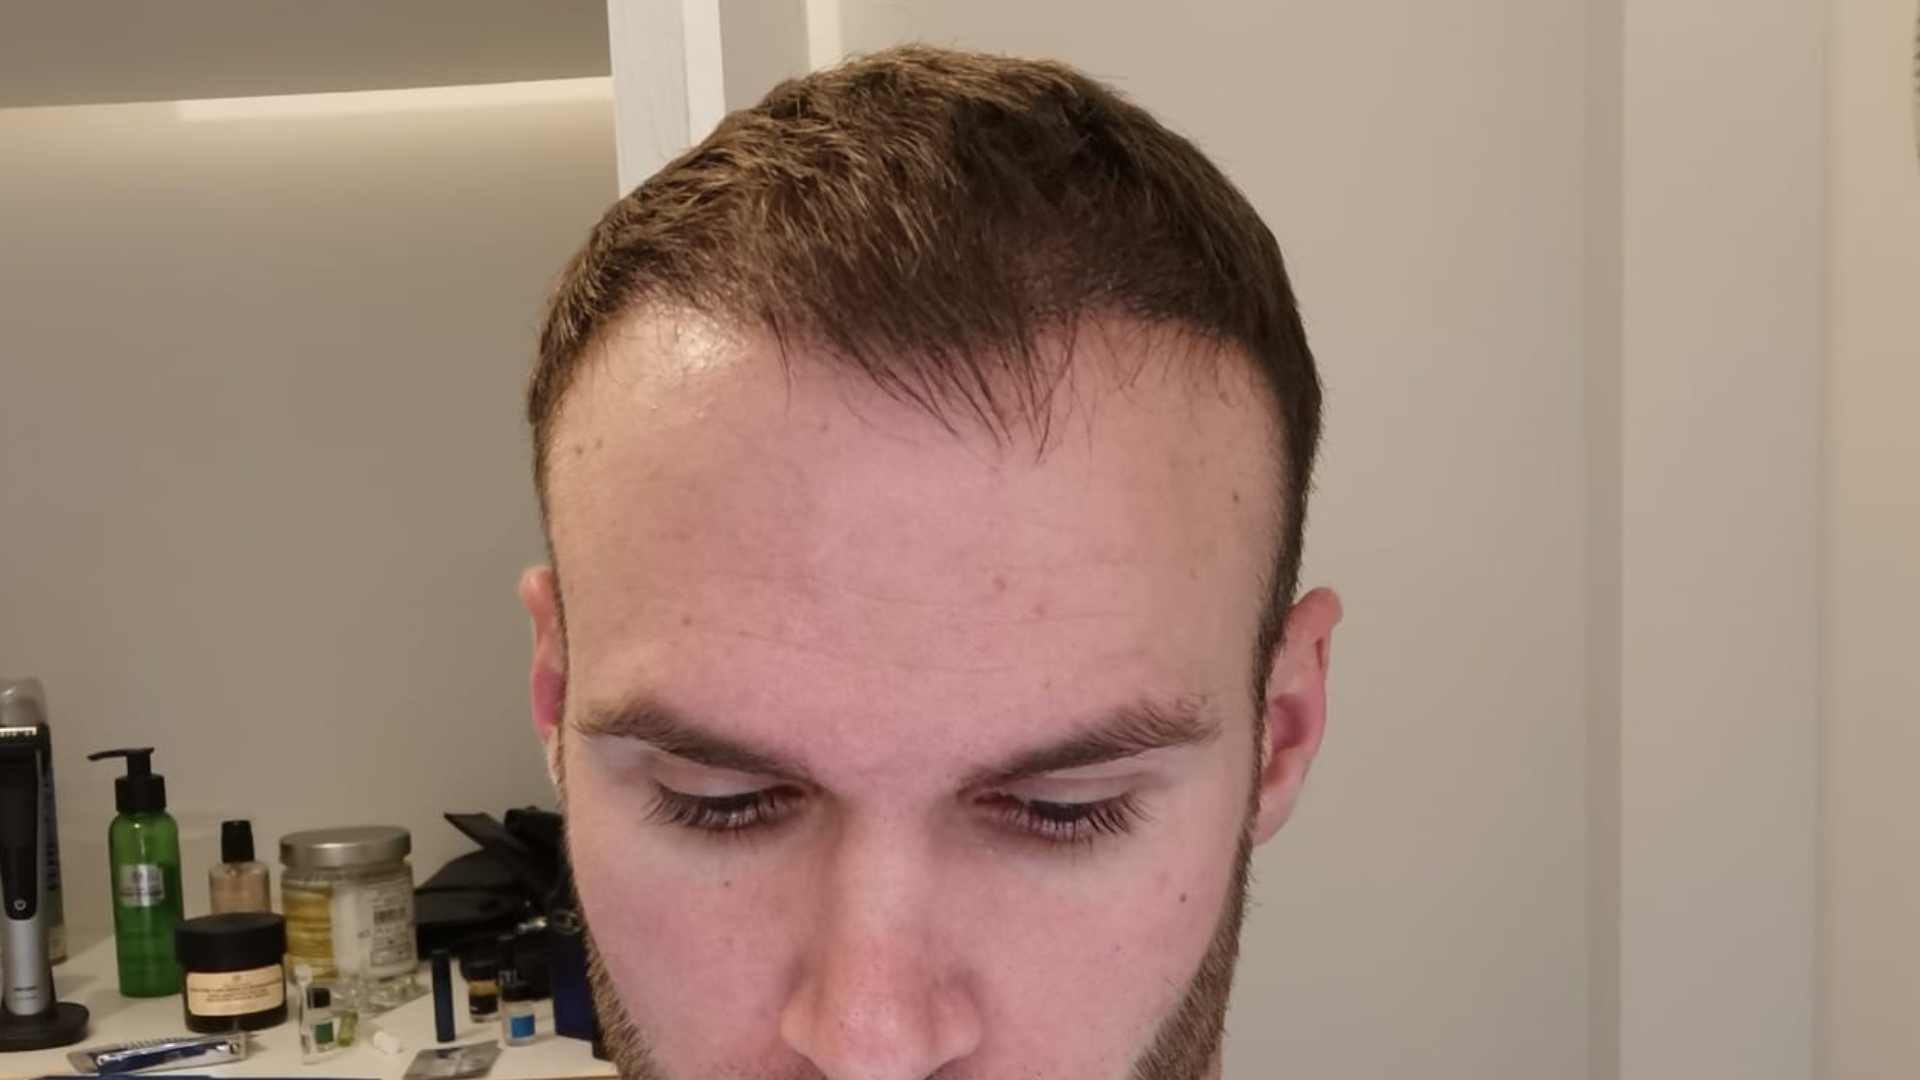 6 months after a hair transplant